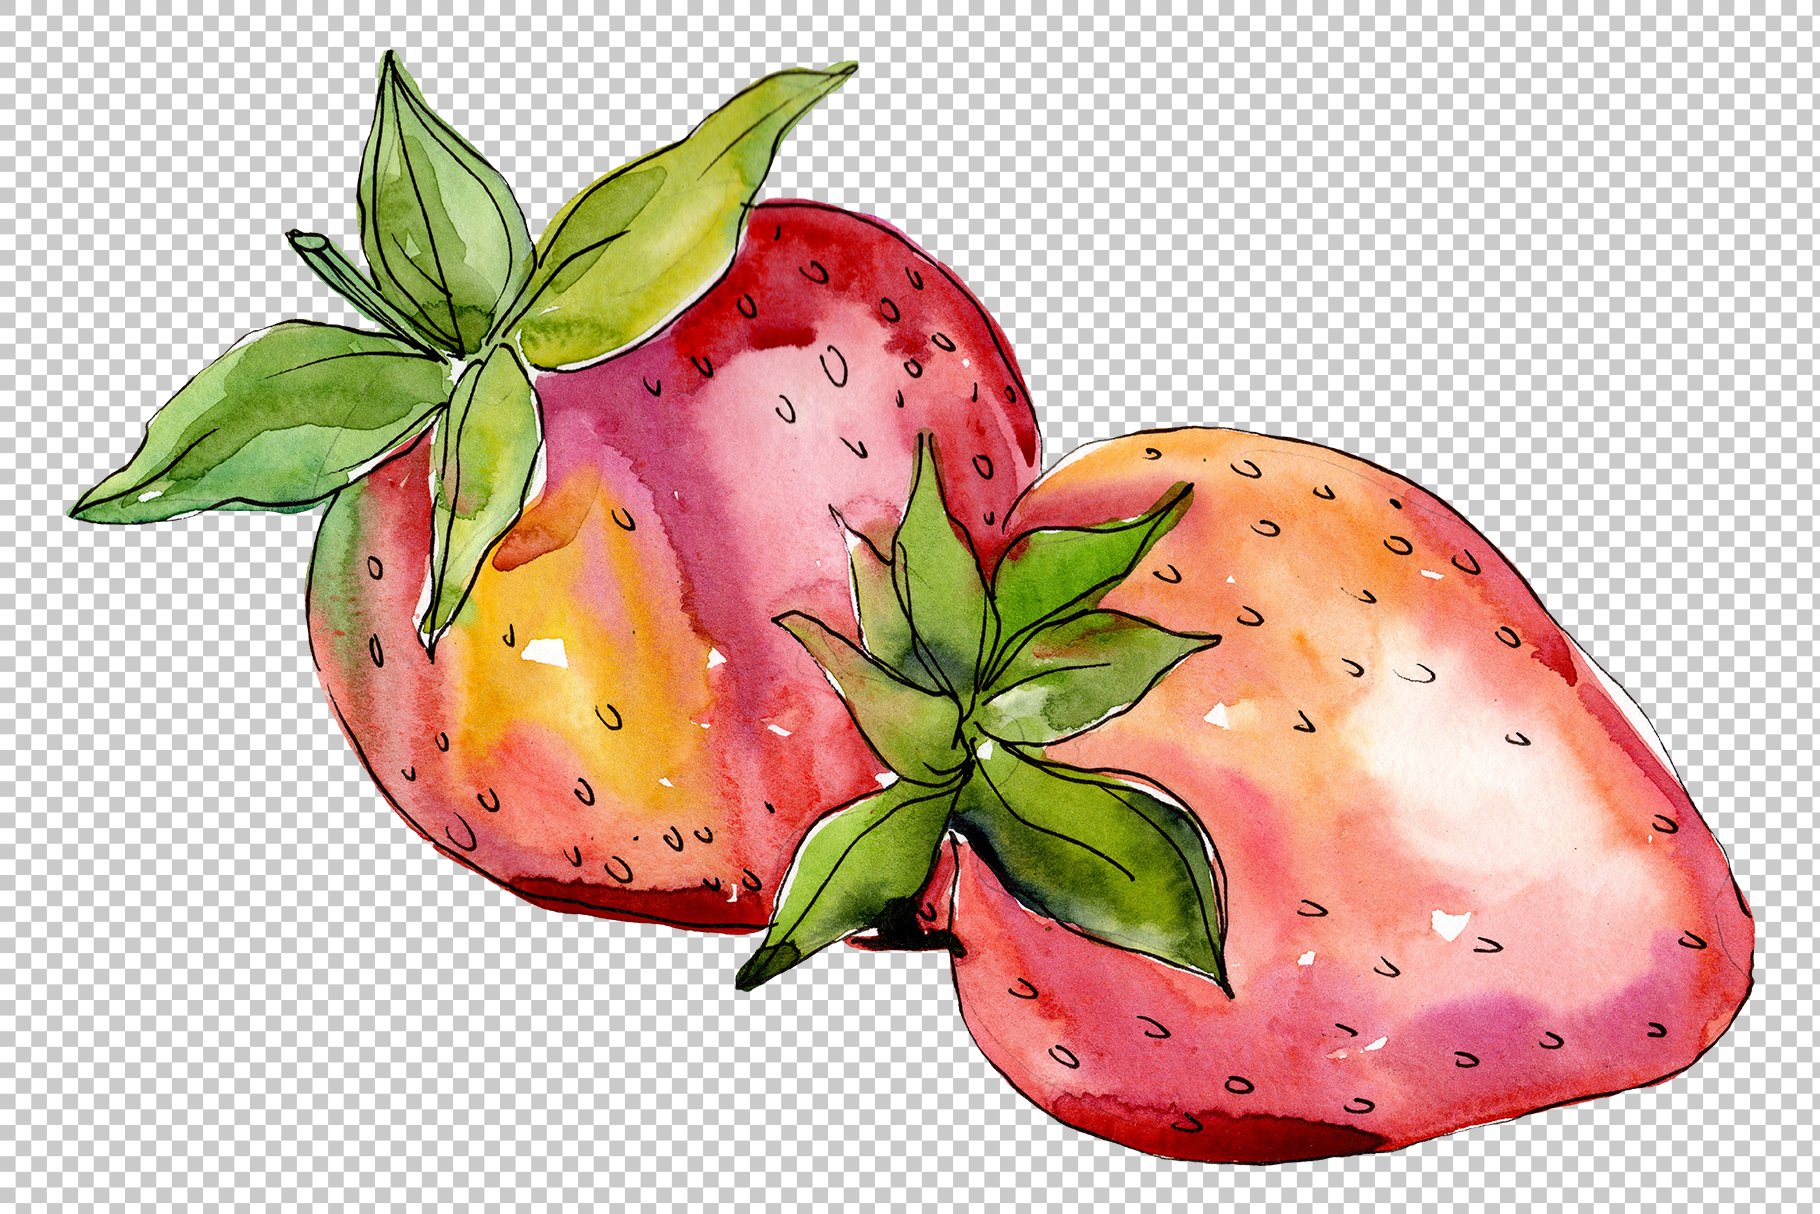 Two watercolor strawberries.